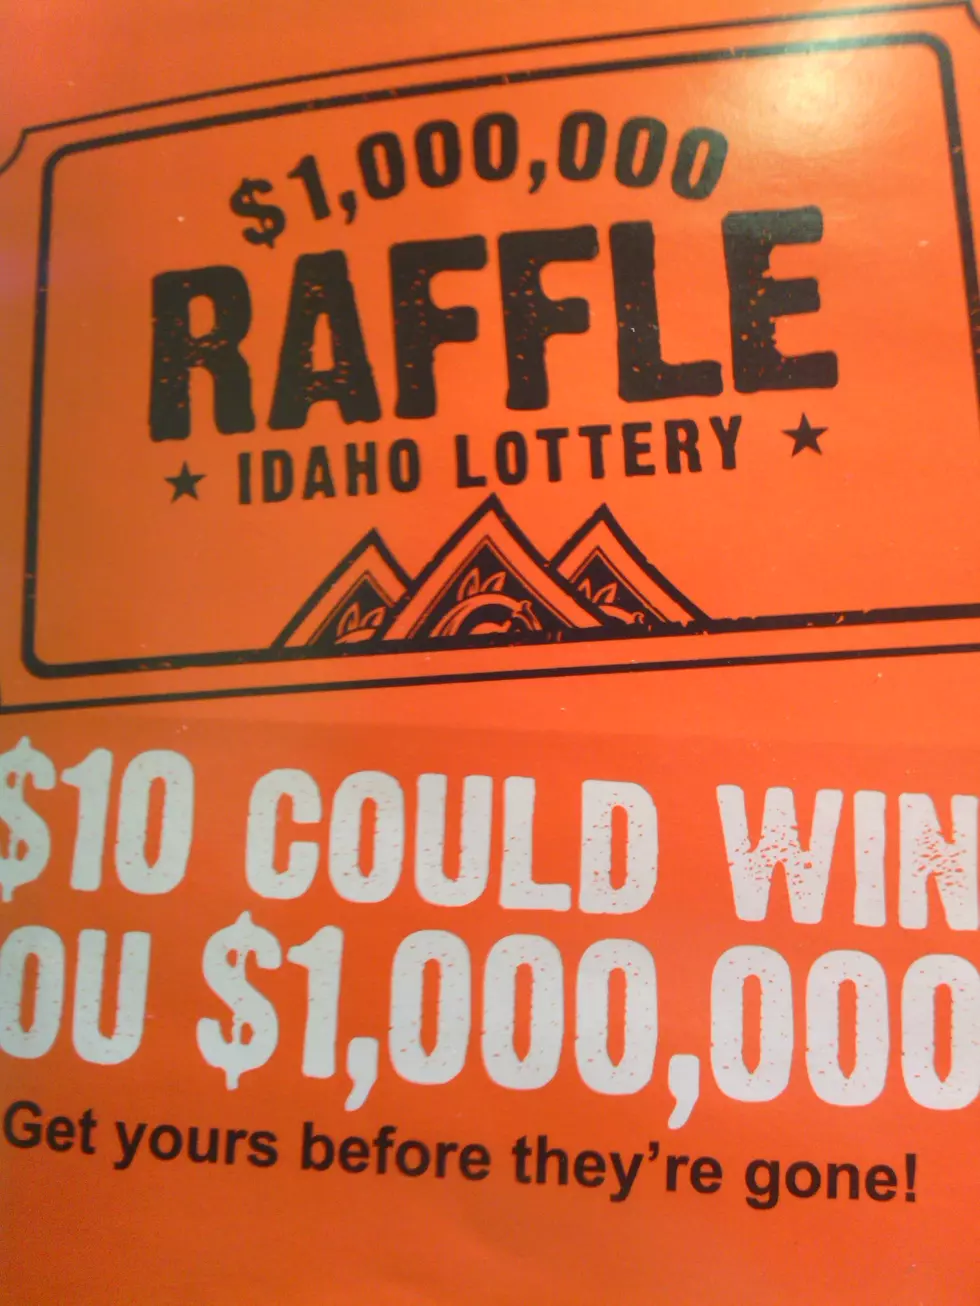 Idaho $1 Million Raffle Expected to Sell Out, Again